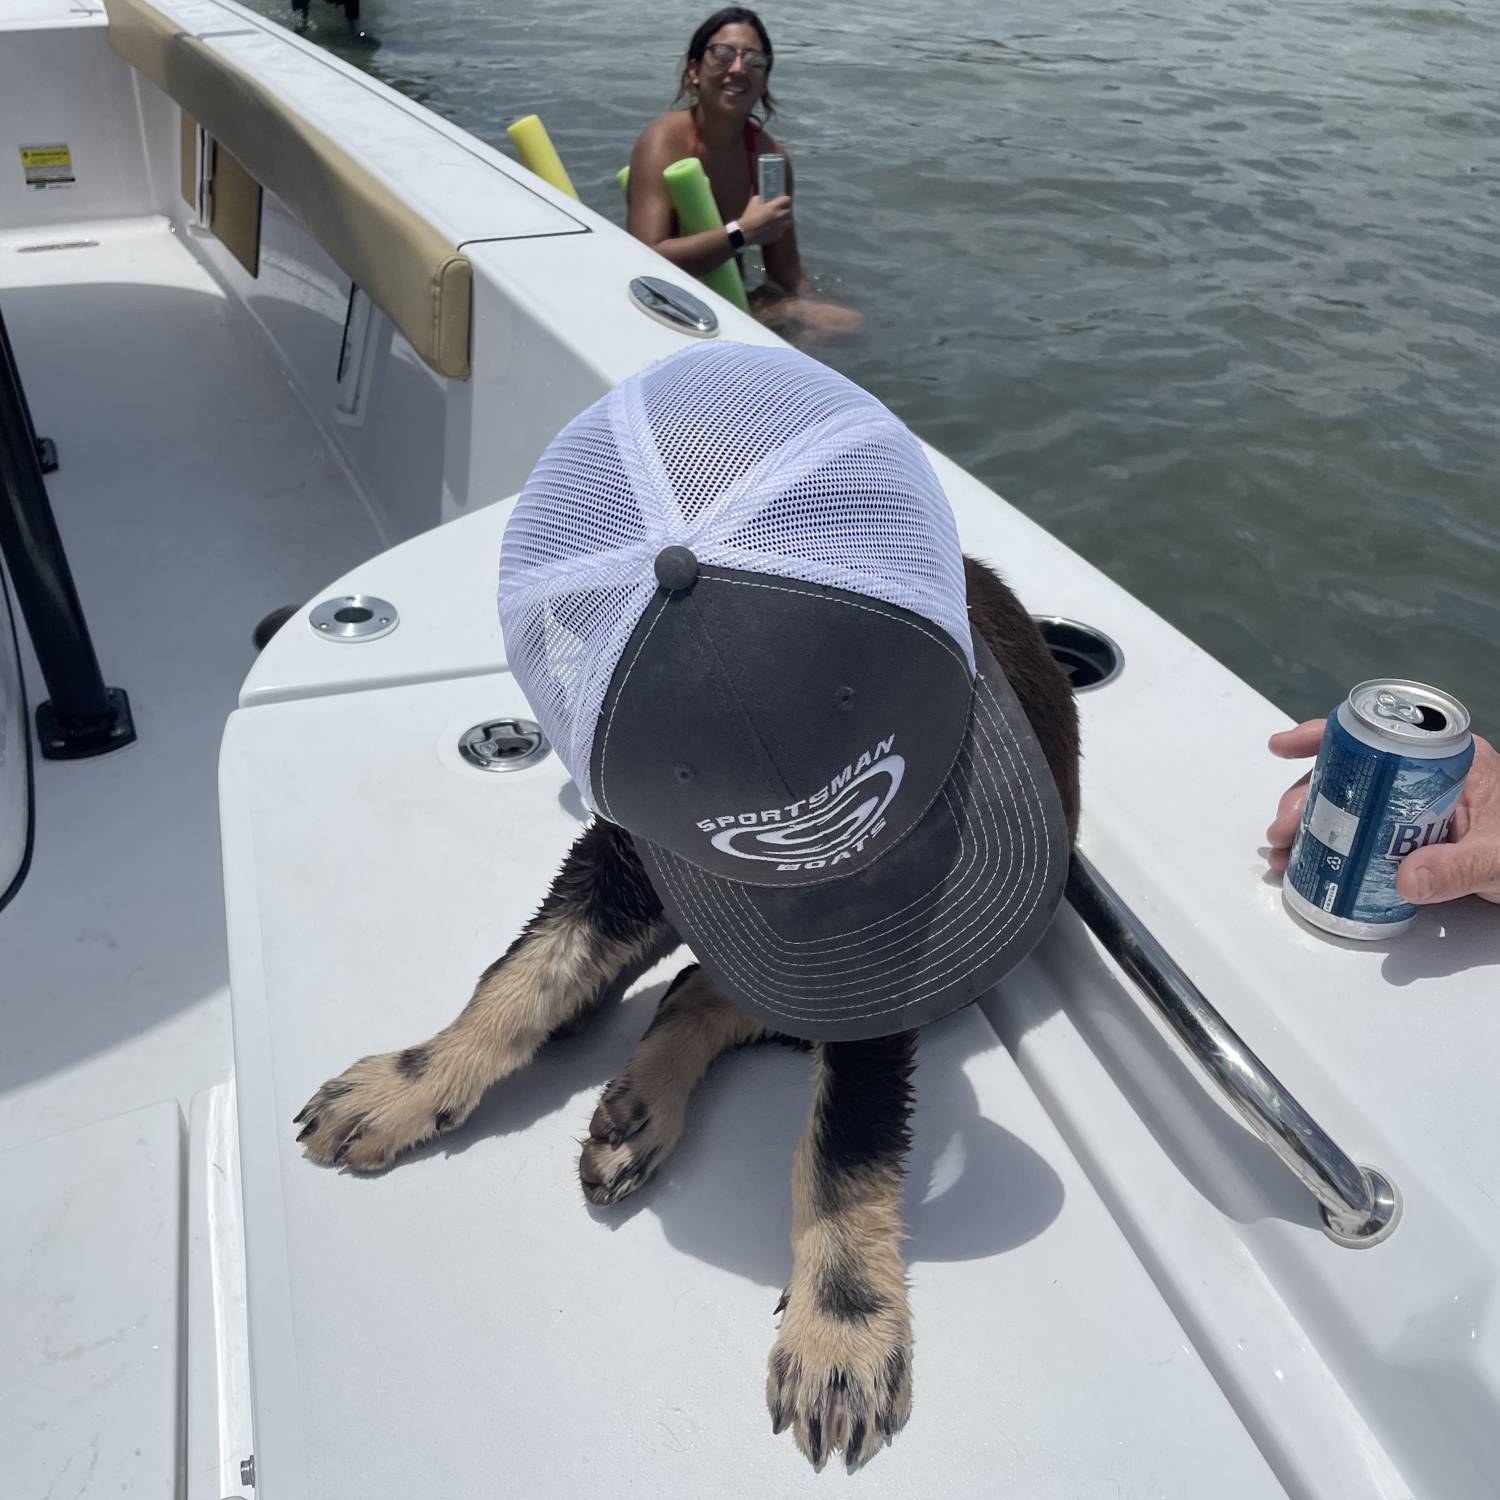 First time our chocolate Labrador, Cooper, got to experience the boat.